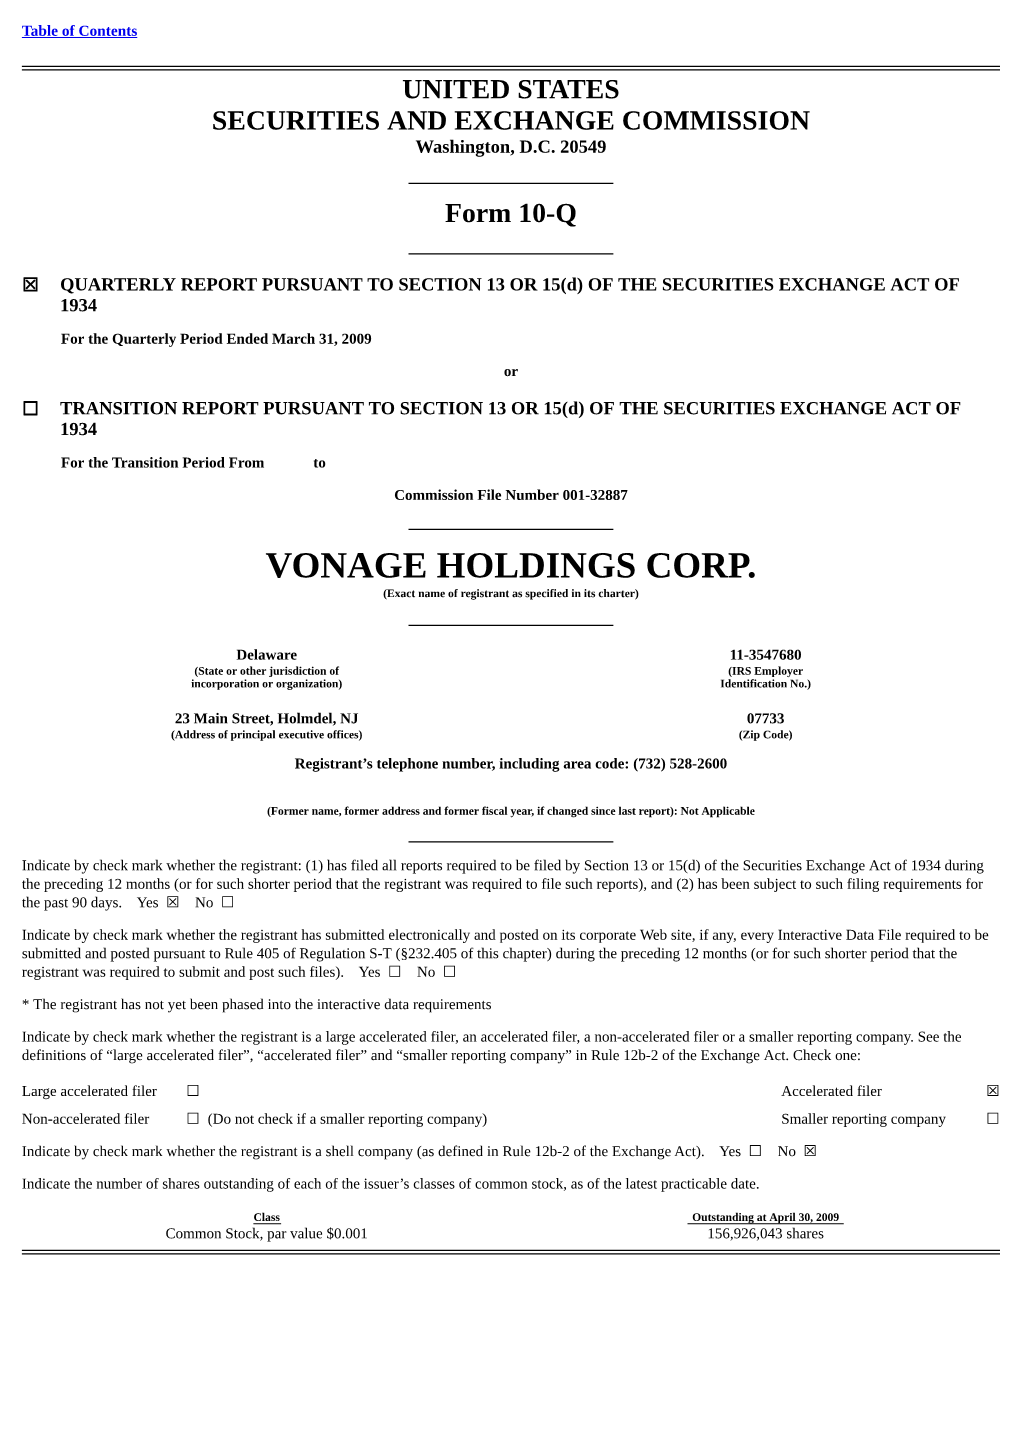 VONAGE HOLDINGS CORP. (Exact Name of Registrant As Specified in Its Charter)